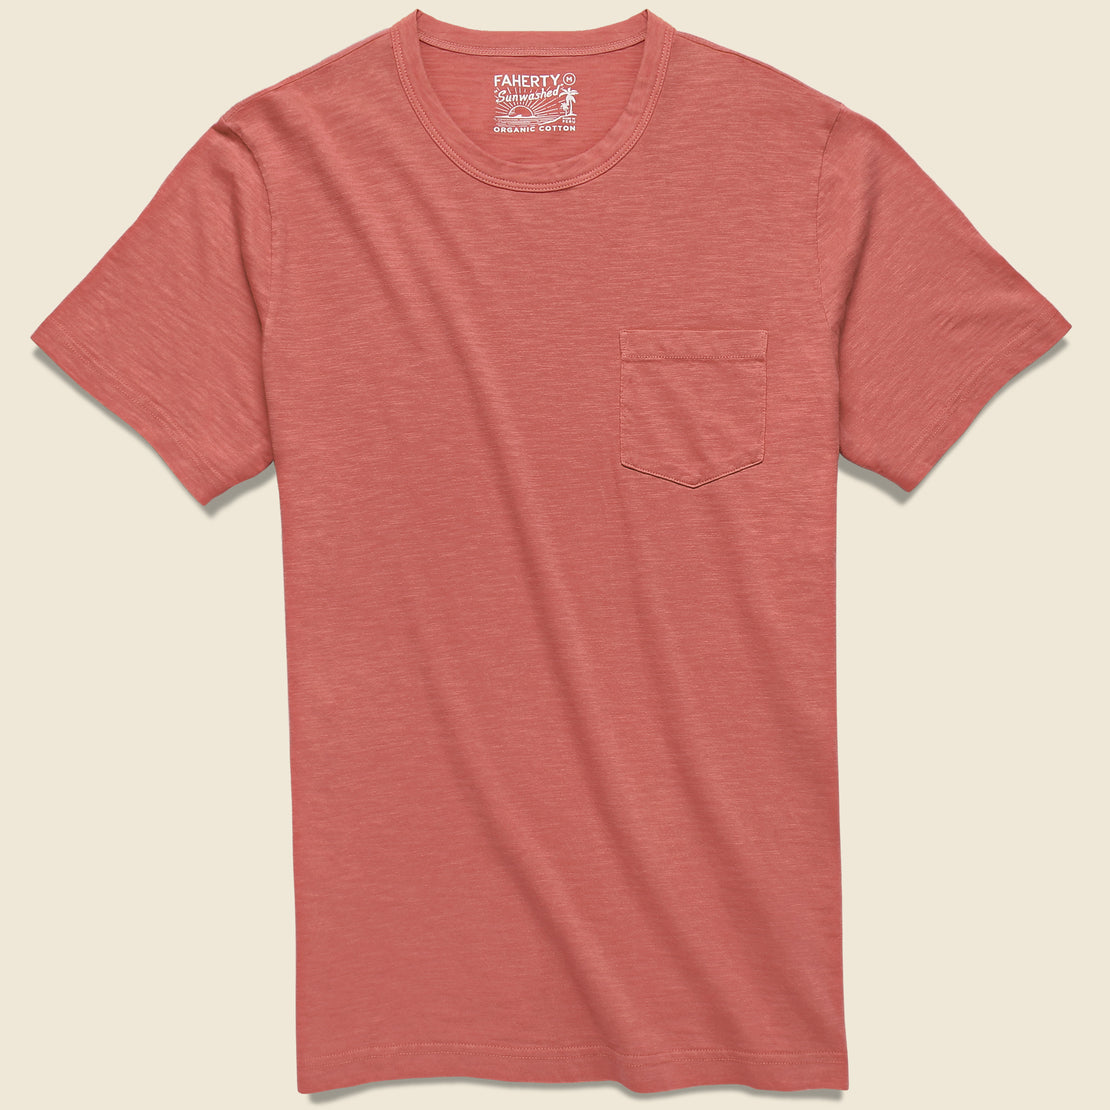 Faherty Garment Dyed Pocket Tee - Hermosa Red